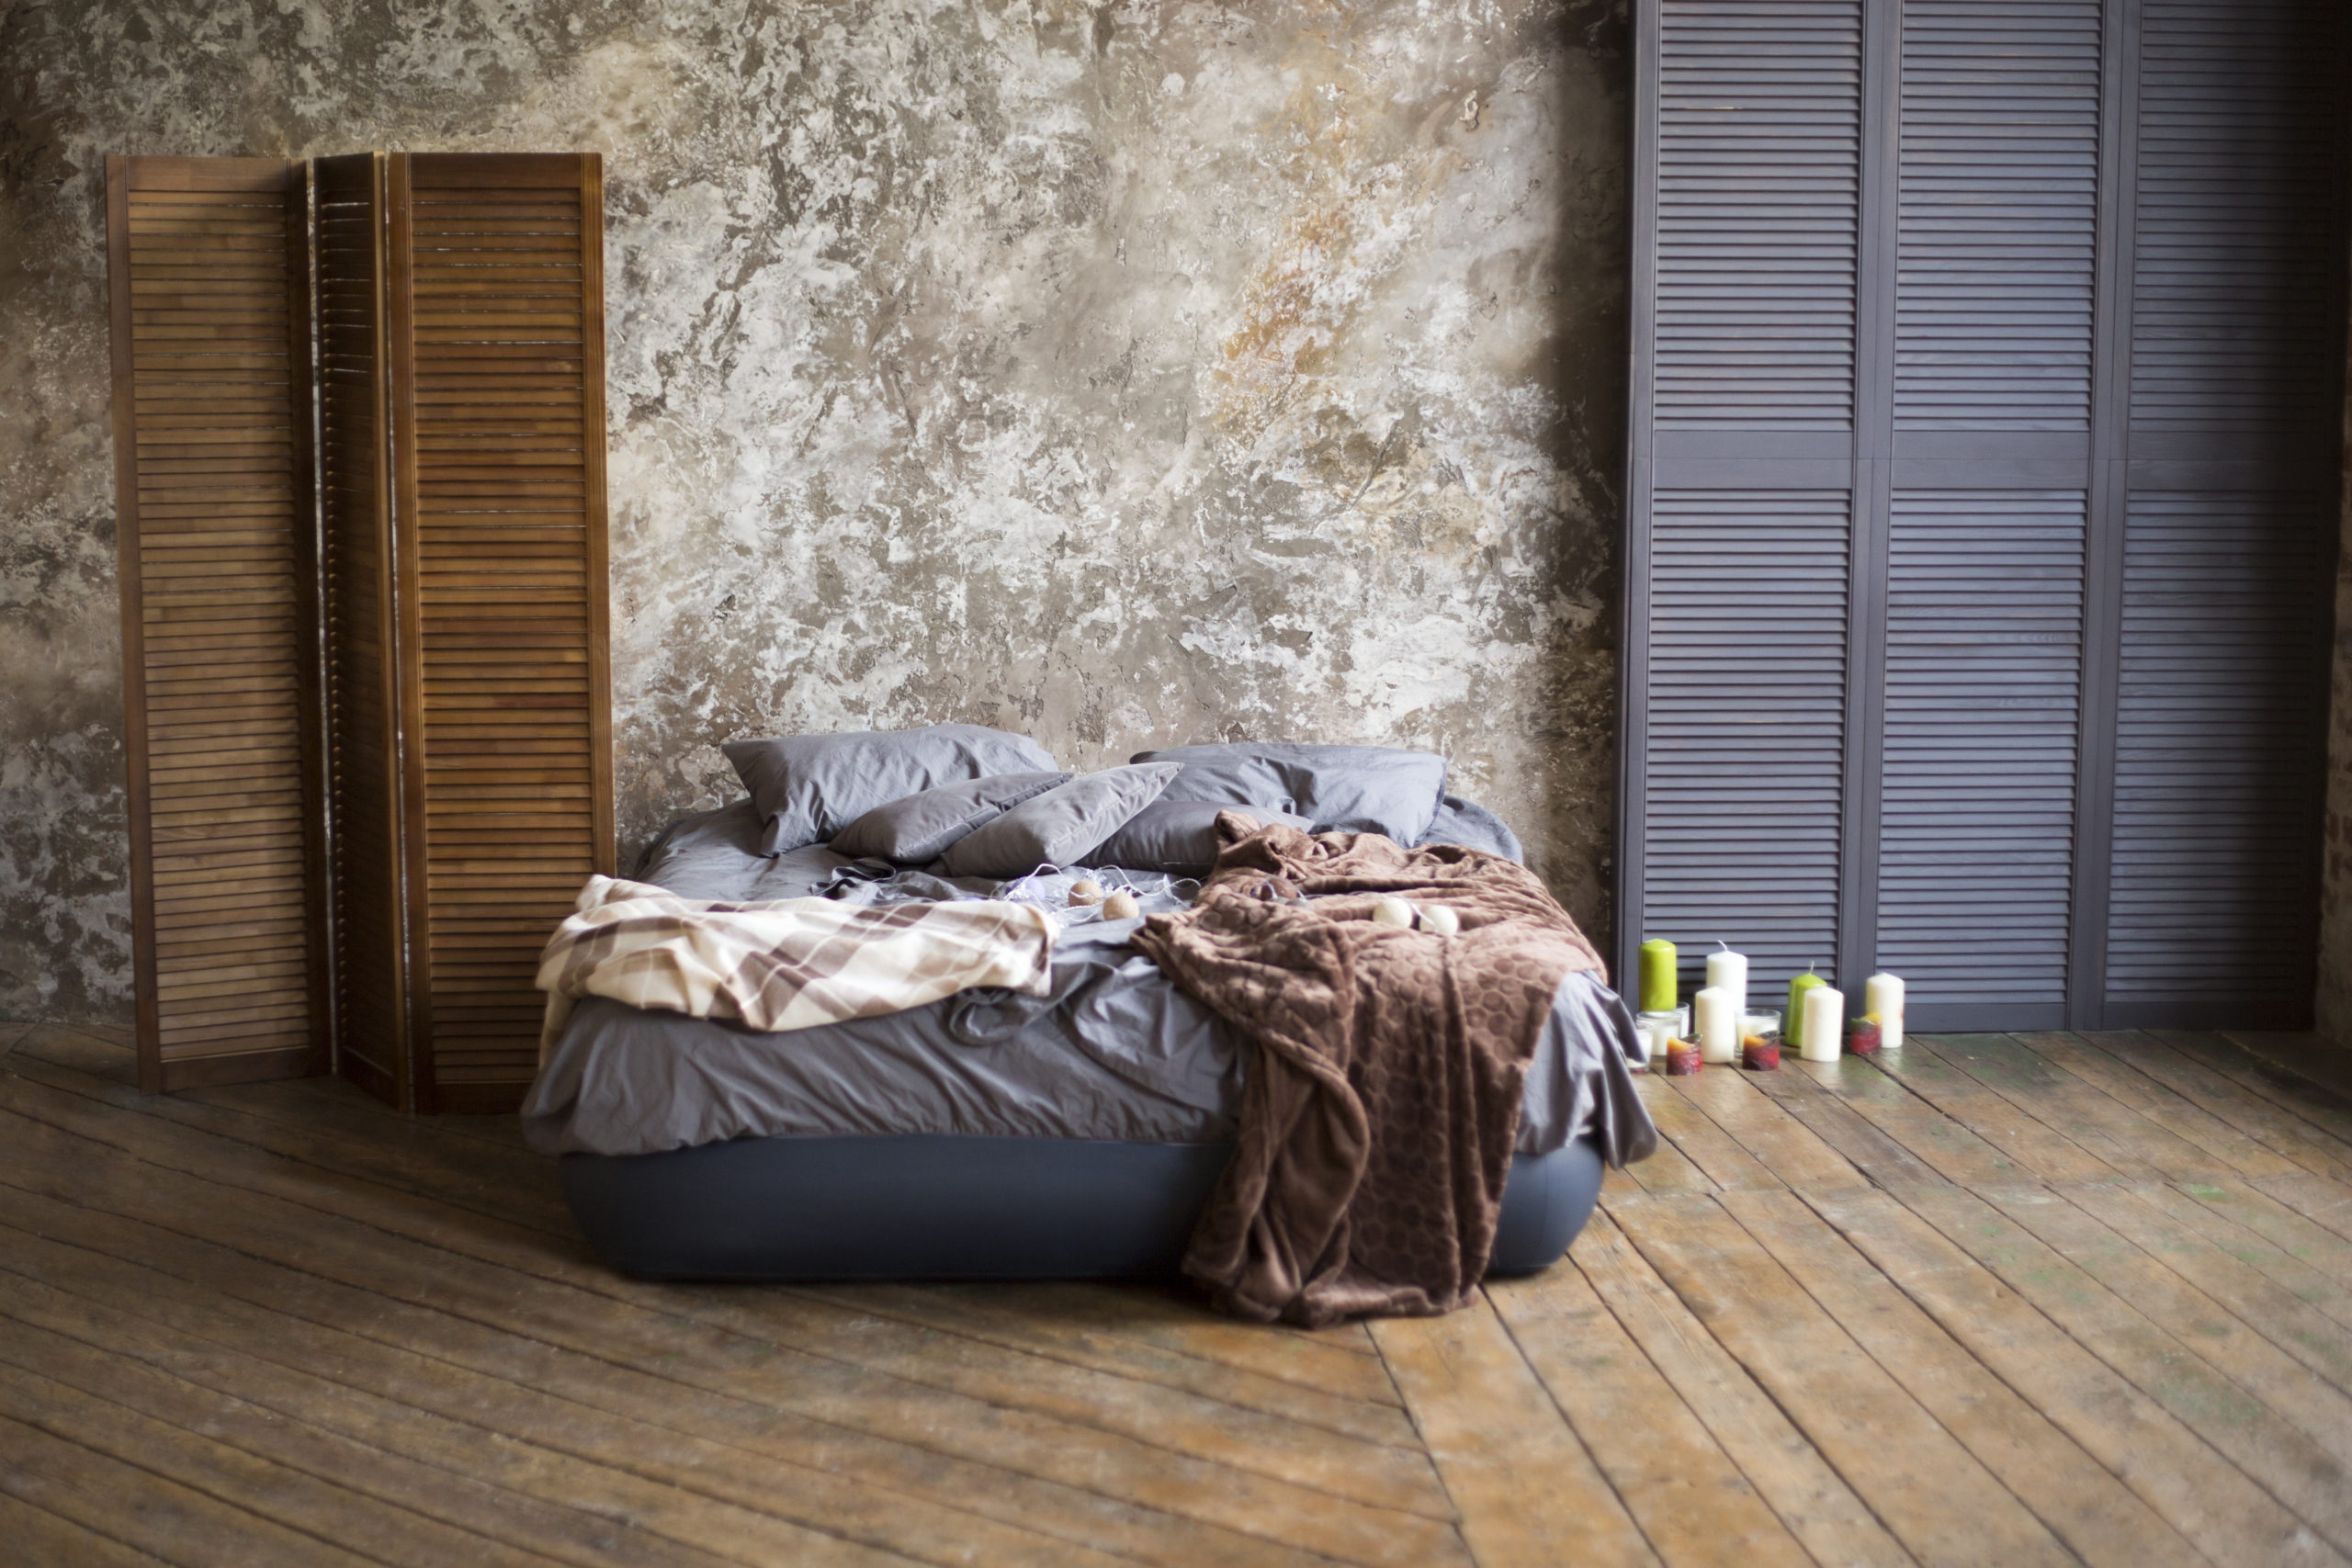 Room With a Gray Bed on a Wooden Floor